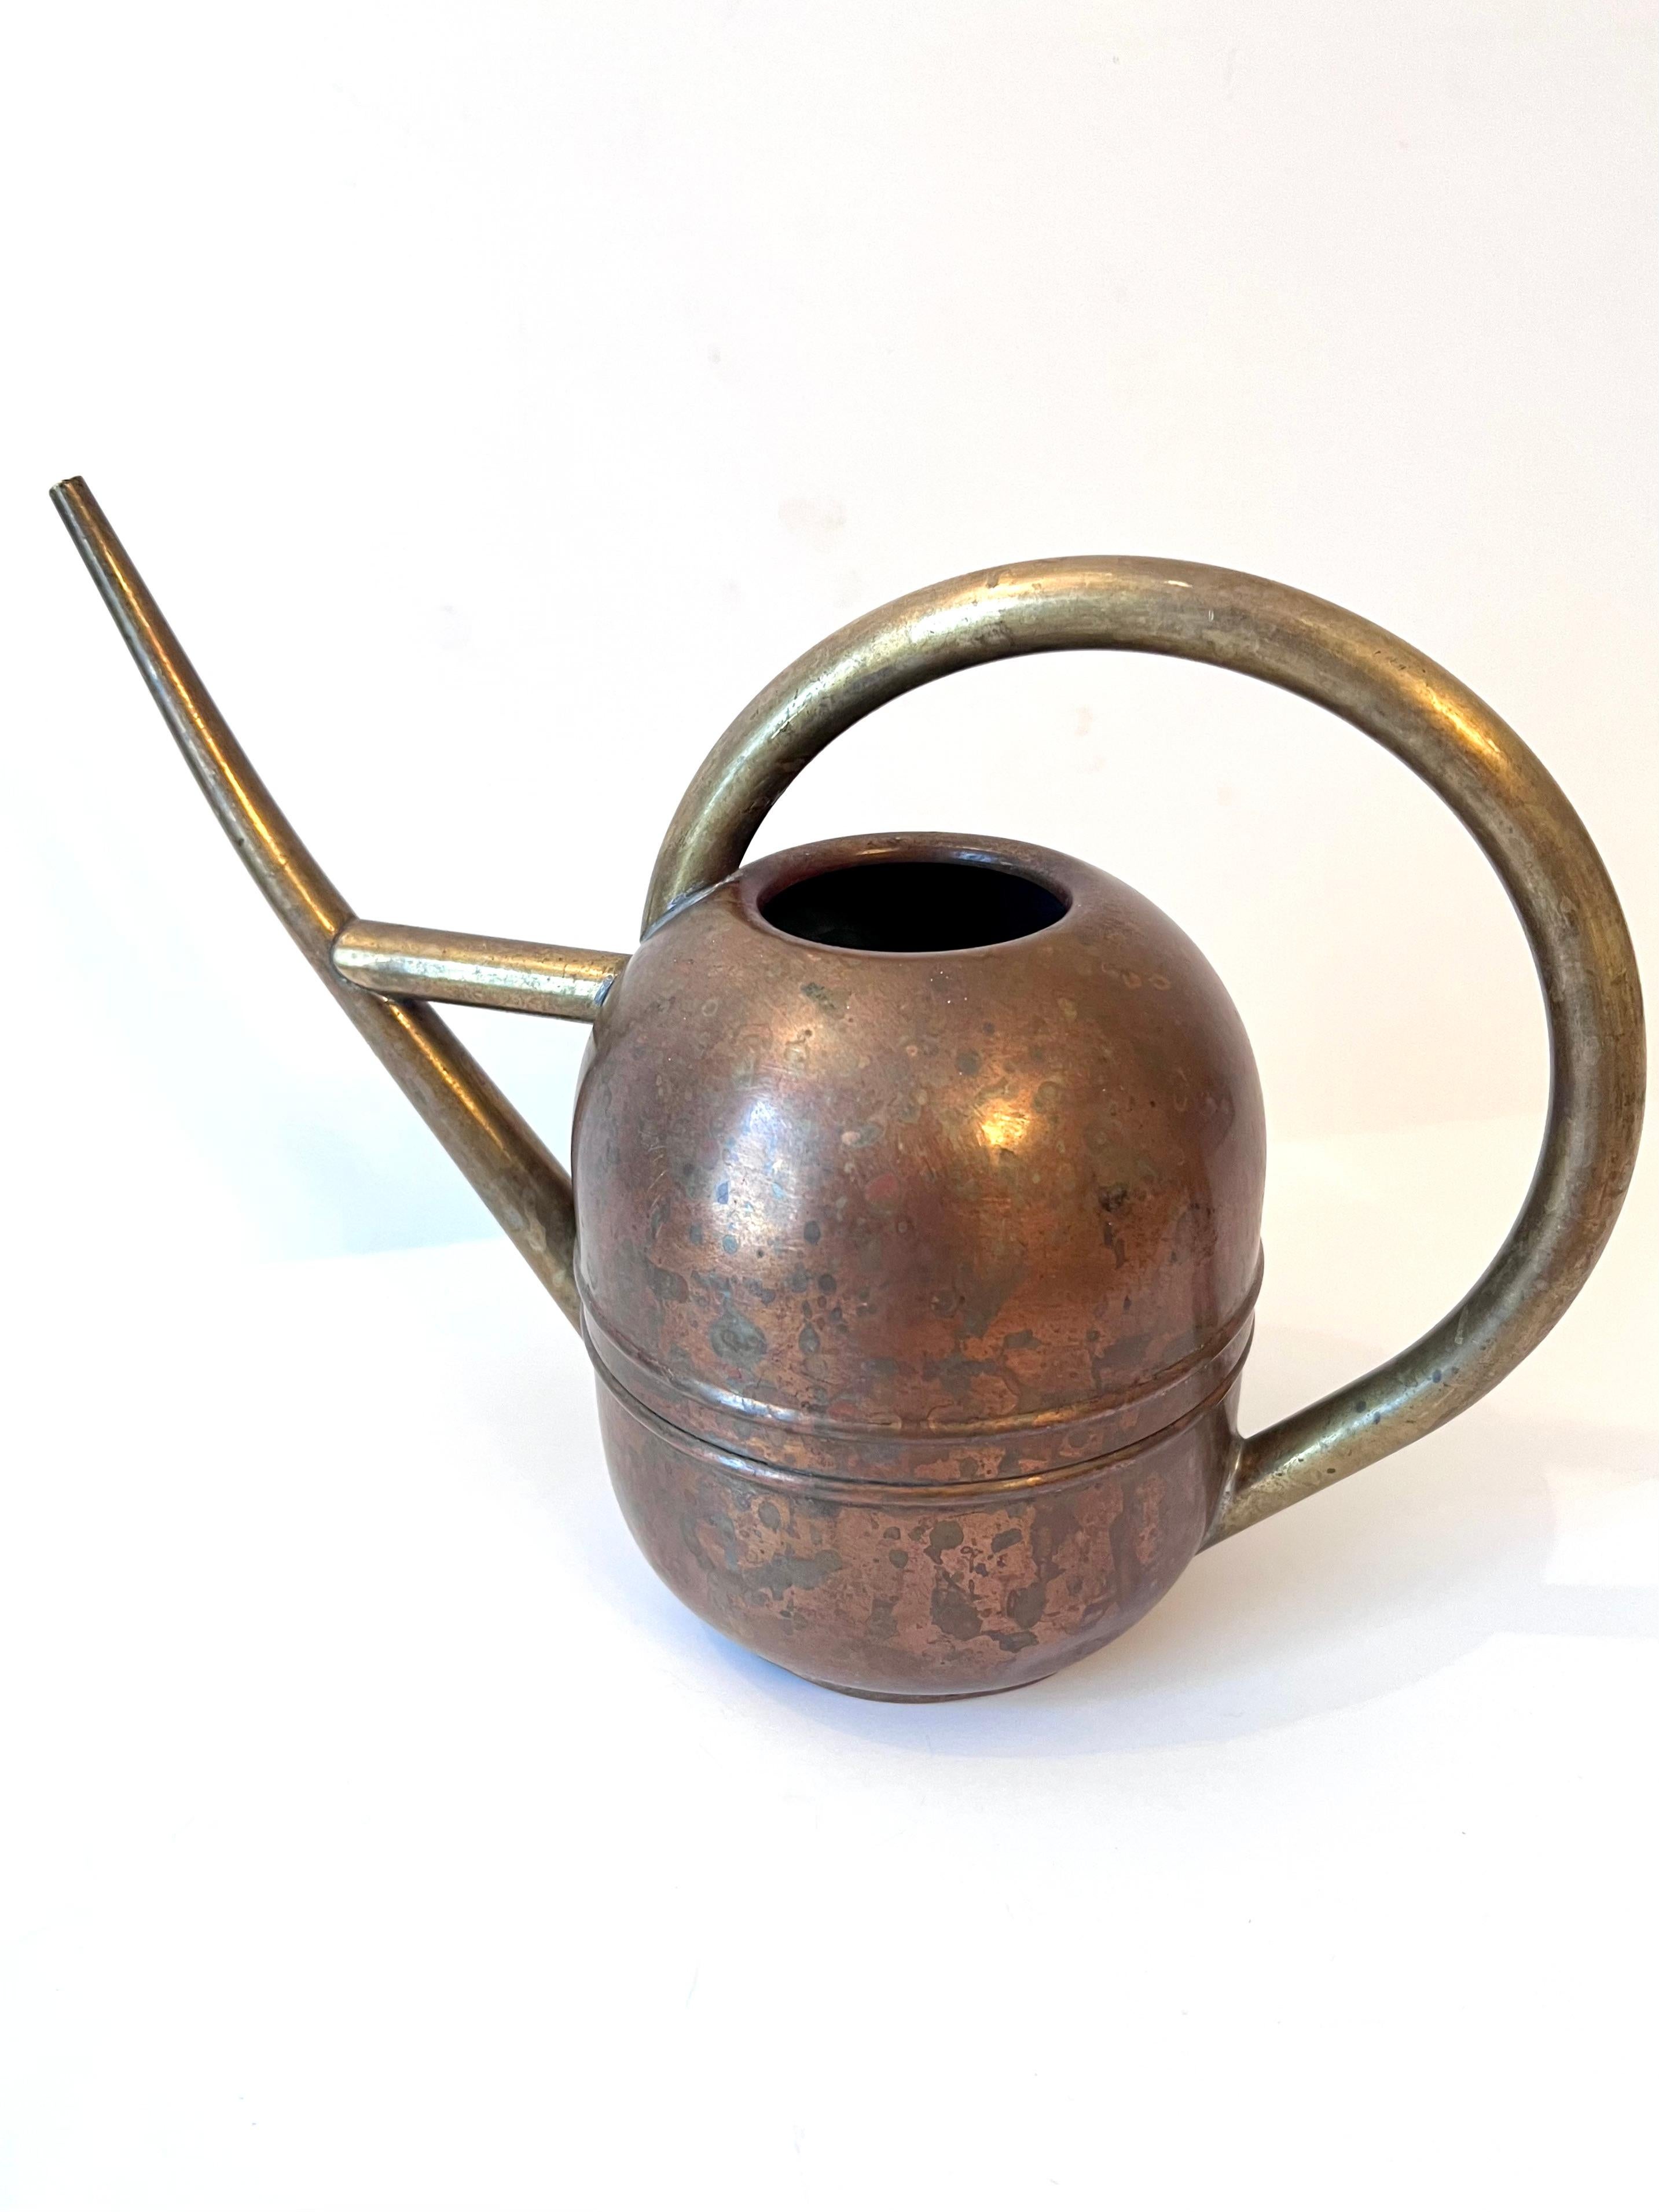 A period Art Deco watering can with beautifully patinated brass and copper. A fully functional piece to water the plants or a compliment to many settings as a decorative piece. The patination is lovely.